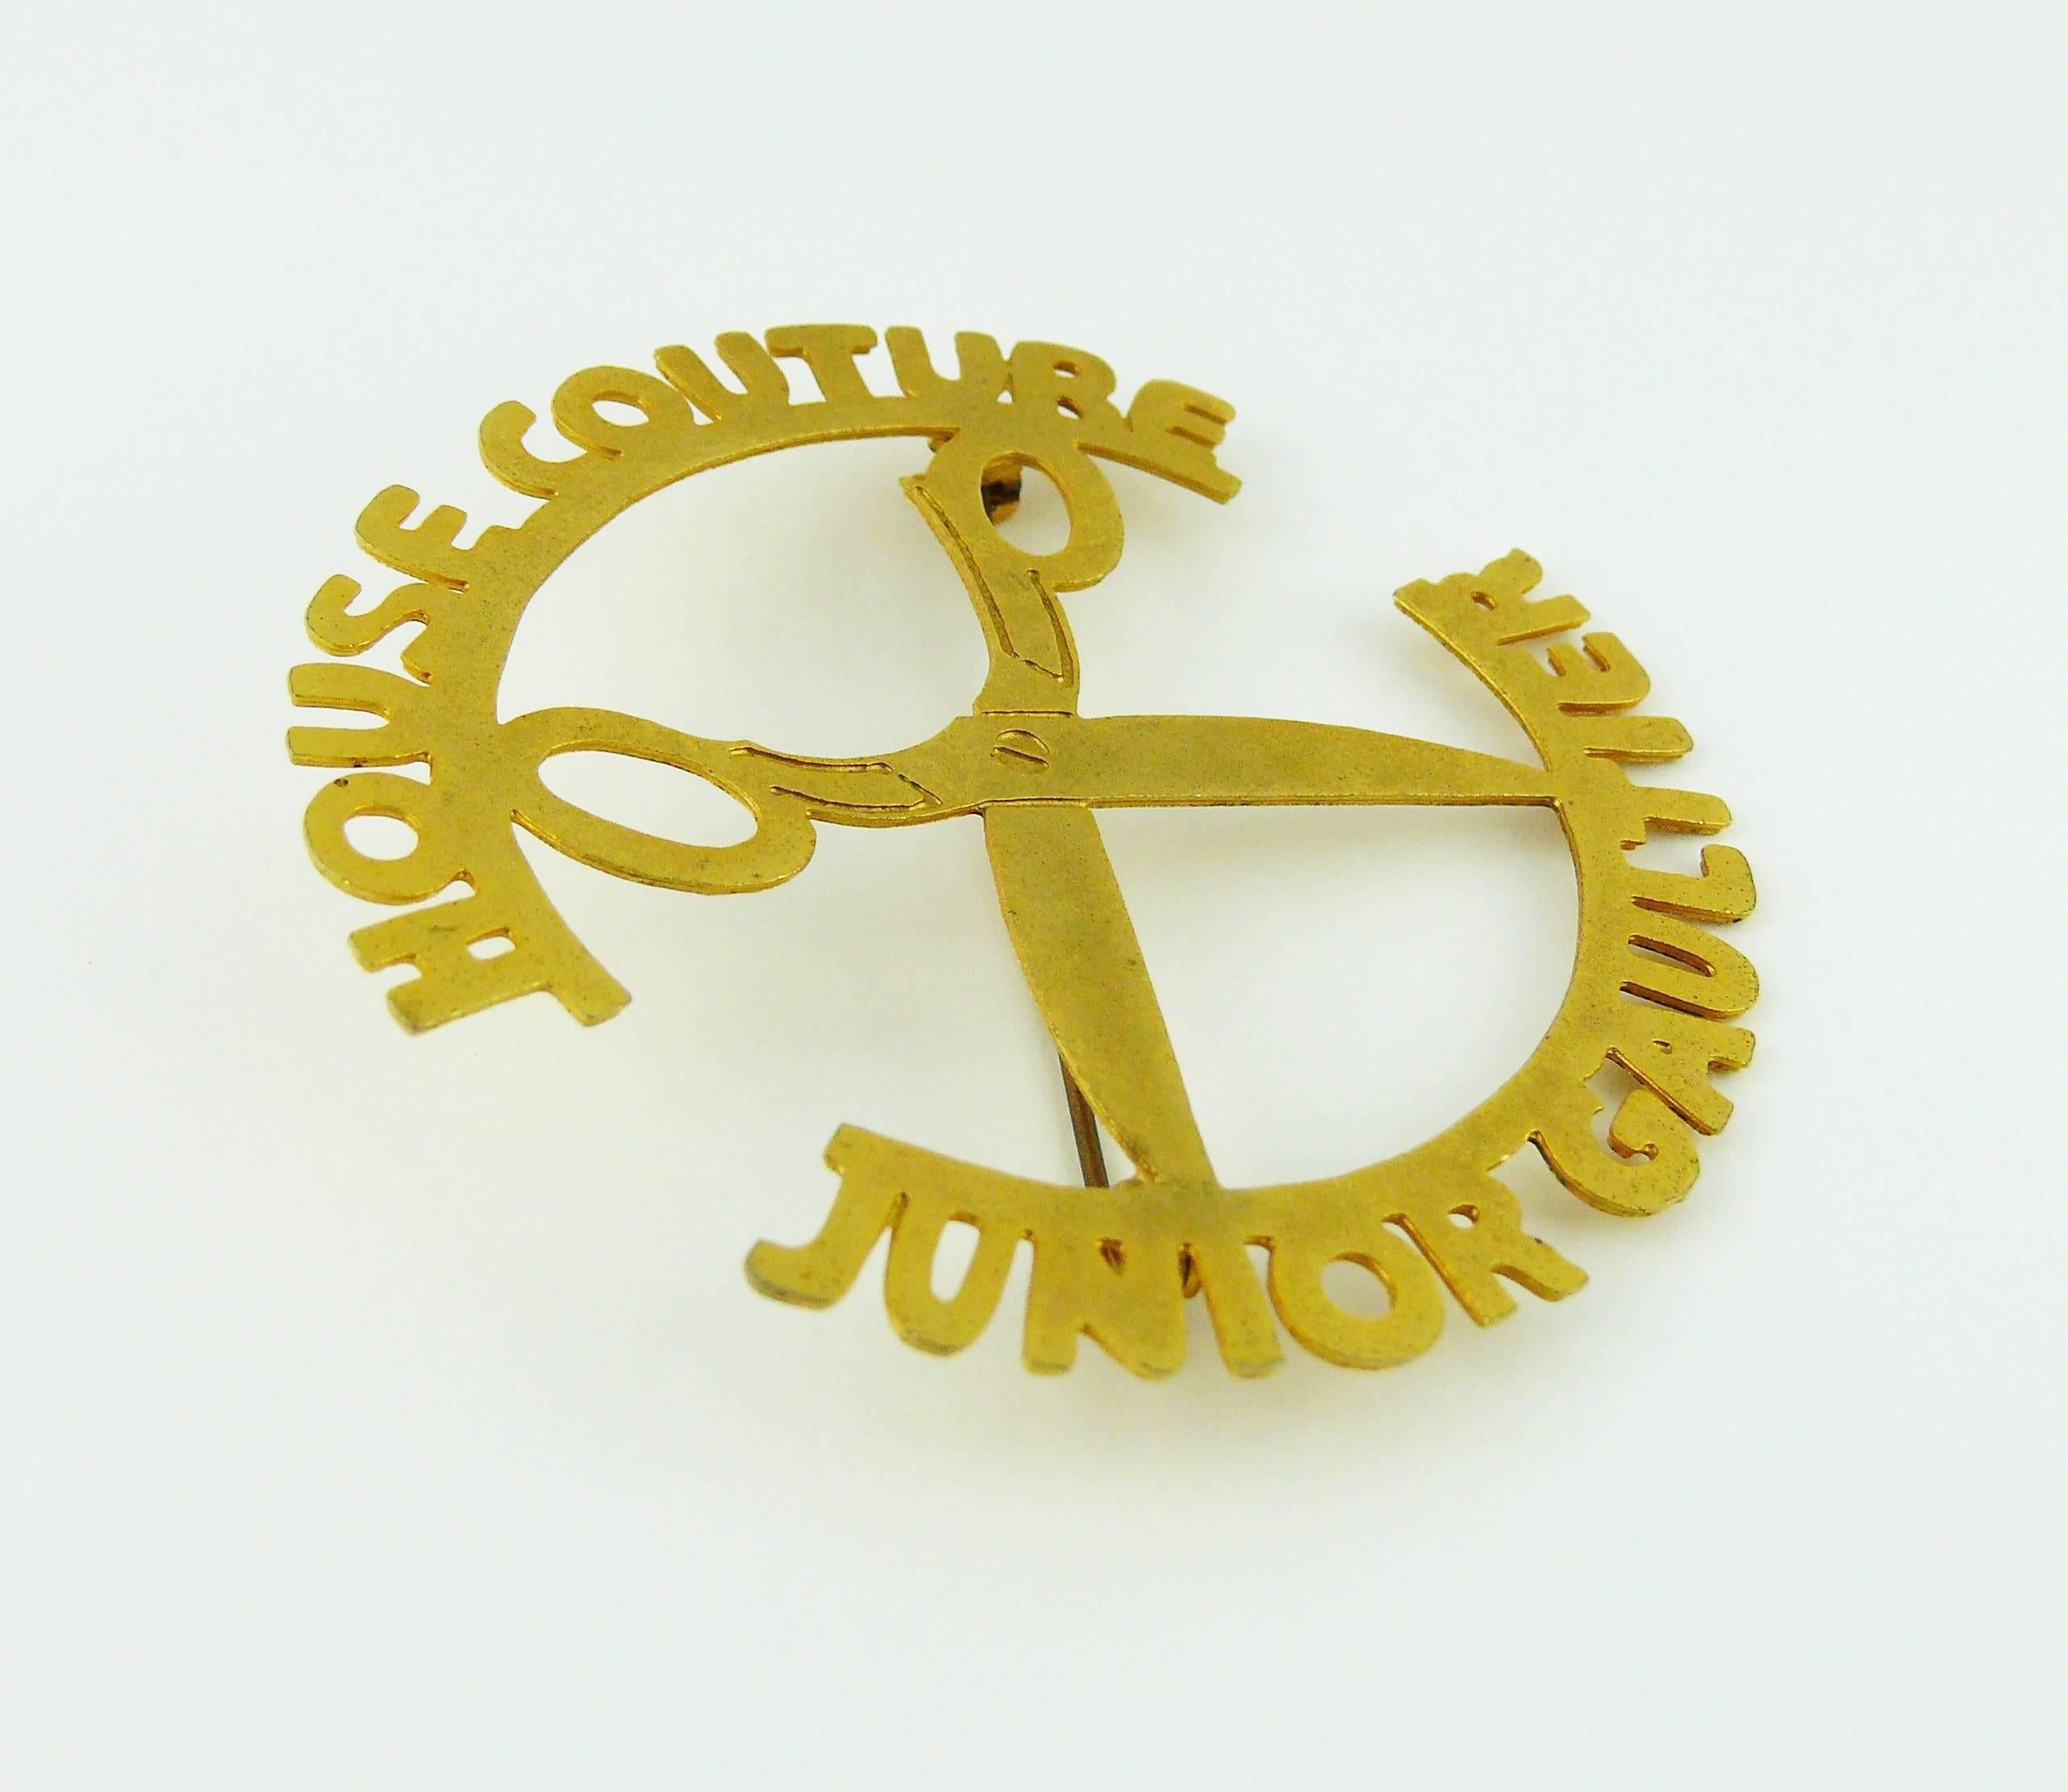 JEAN PAUL GAULTIER vintage "House Couture Junior Gaultier" cut-out gold toned brooch.

JEWELRY CONDITION CHART
- New or never worn : item is in pristine condition with no noticeable imperfections
- Excellent : item has been used and may